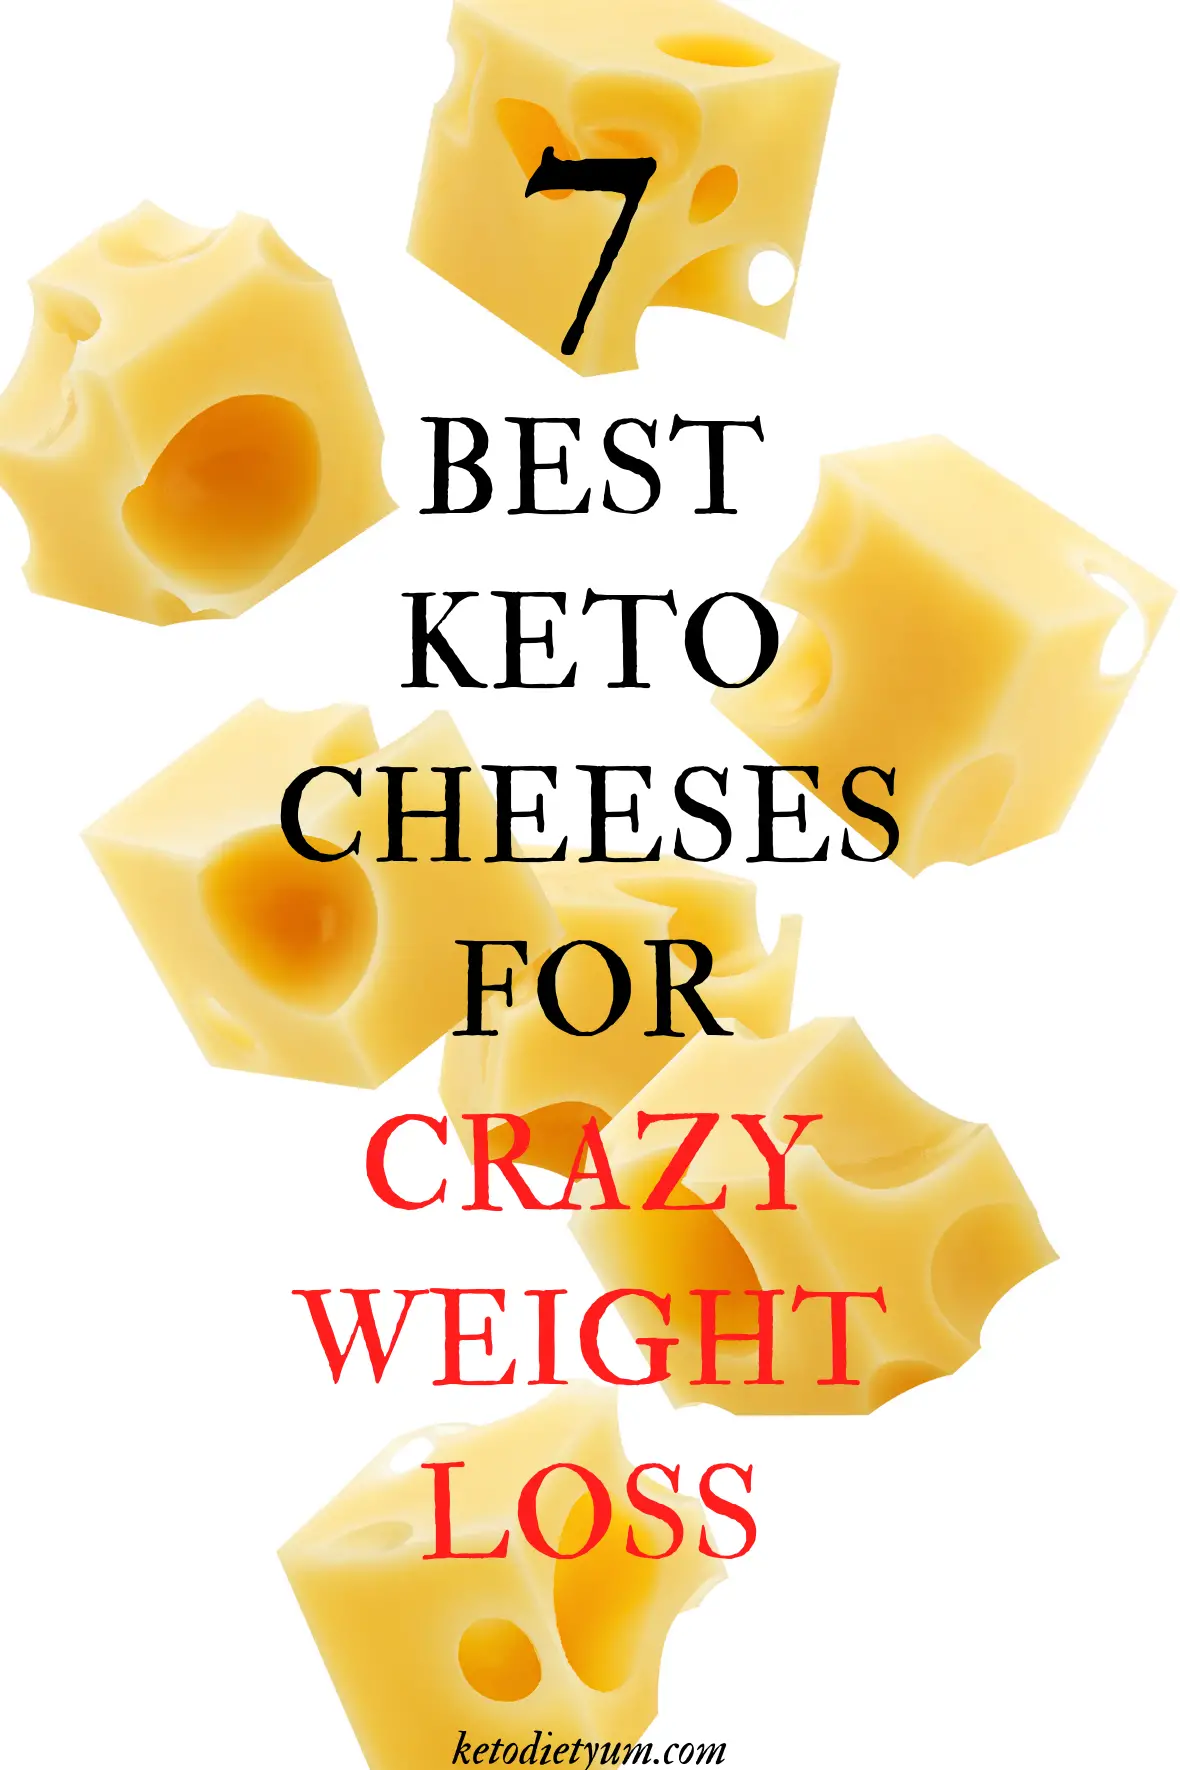 Keto Cheese: 7 Best Types and 2 Worst Types for the Keto Diet ...